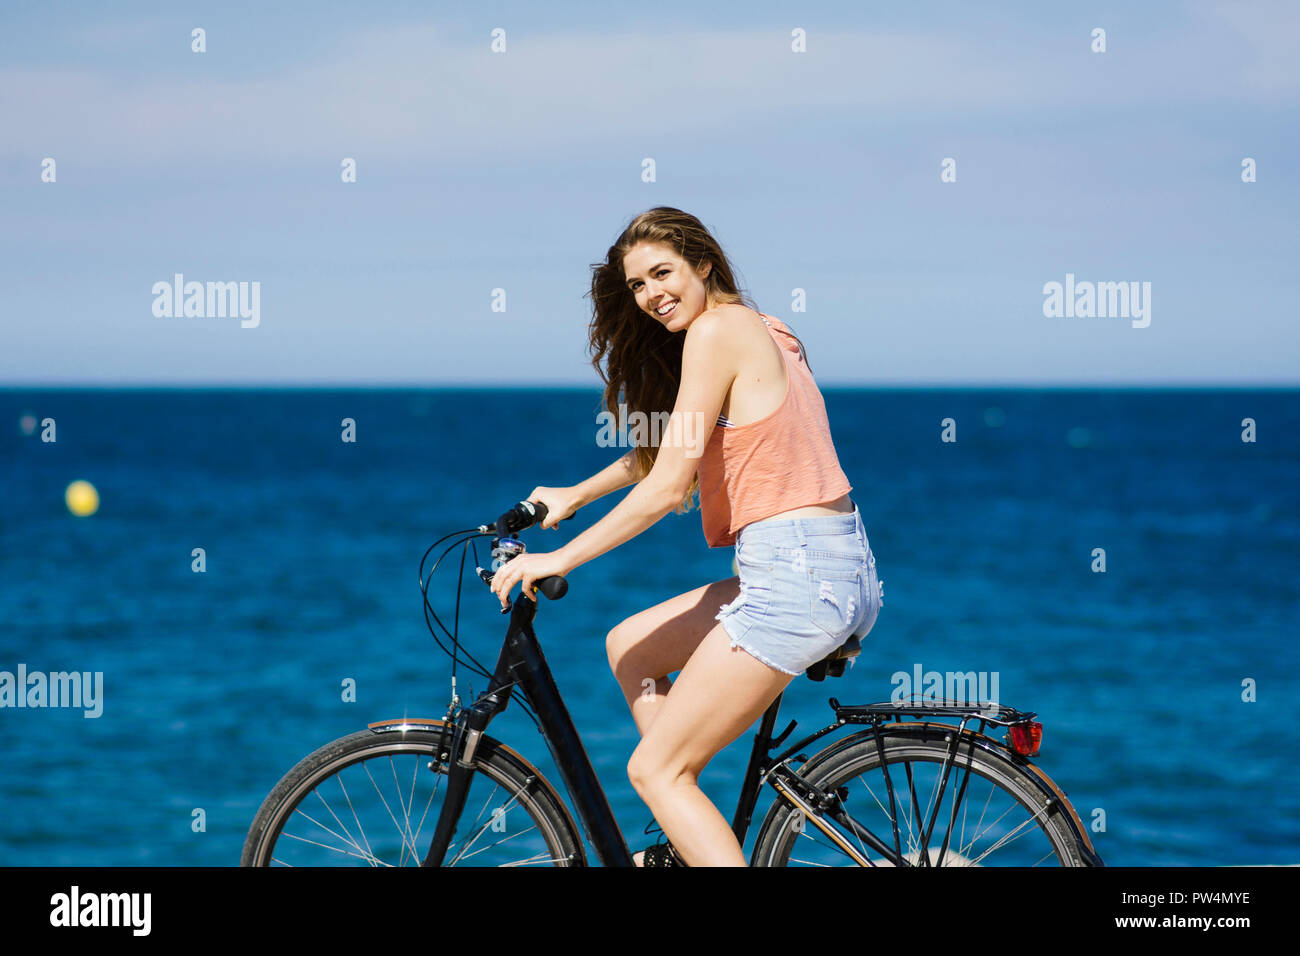 Happy woman riding bicycle at beach against sky during sunny day Stock Photo